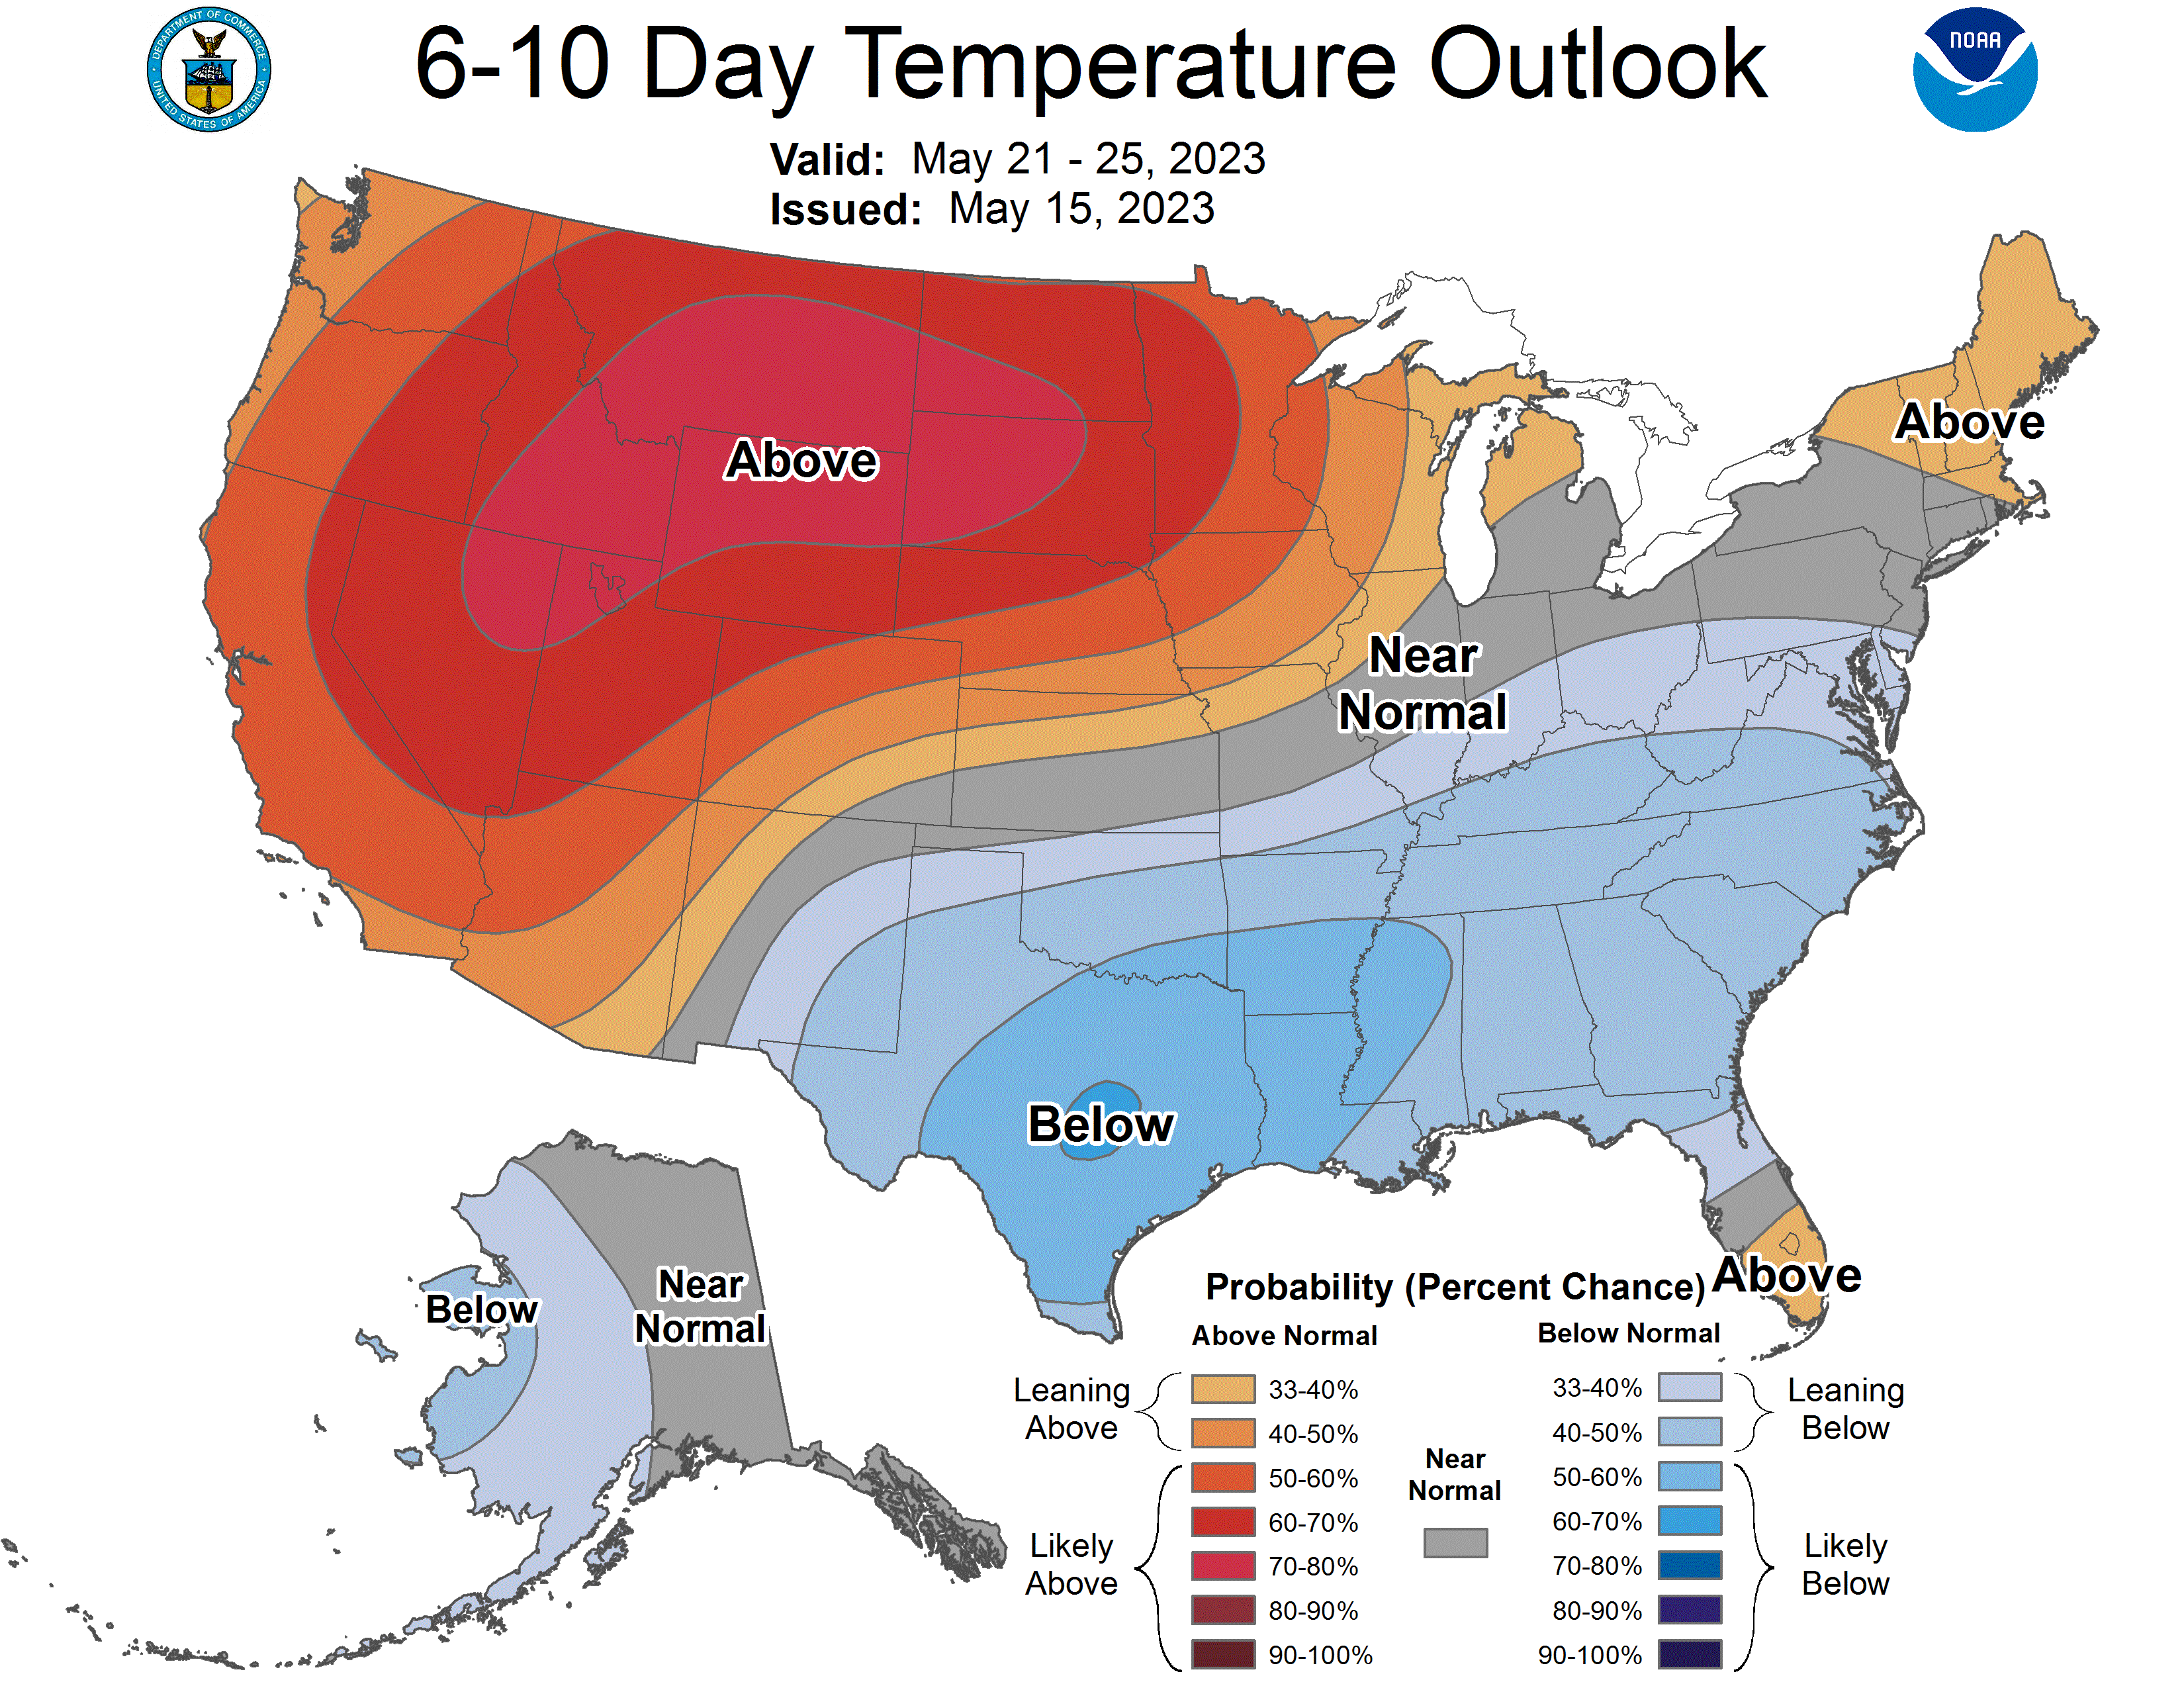 6-10 day temperature outlook.